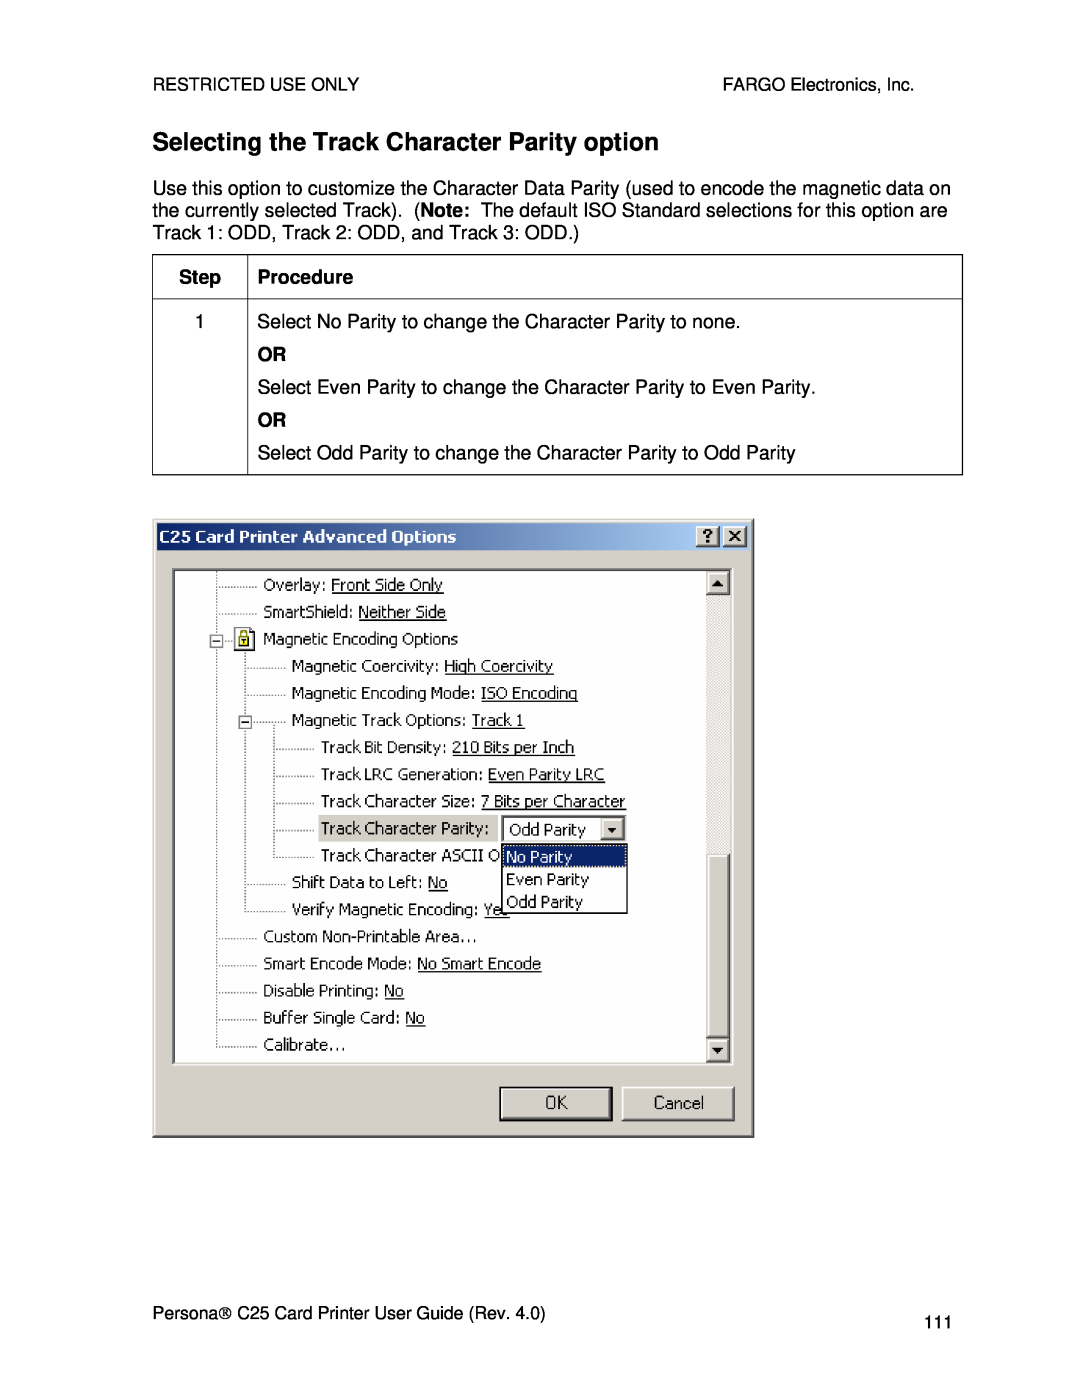 FARGO electronic S000256 manual Selecting the Track Character Parity option 